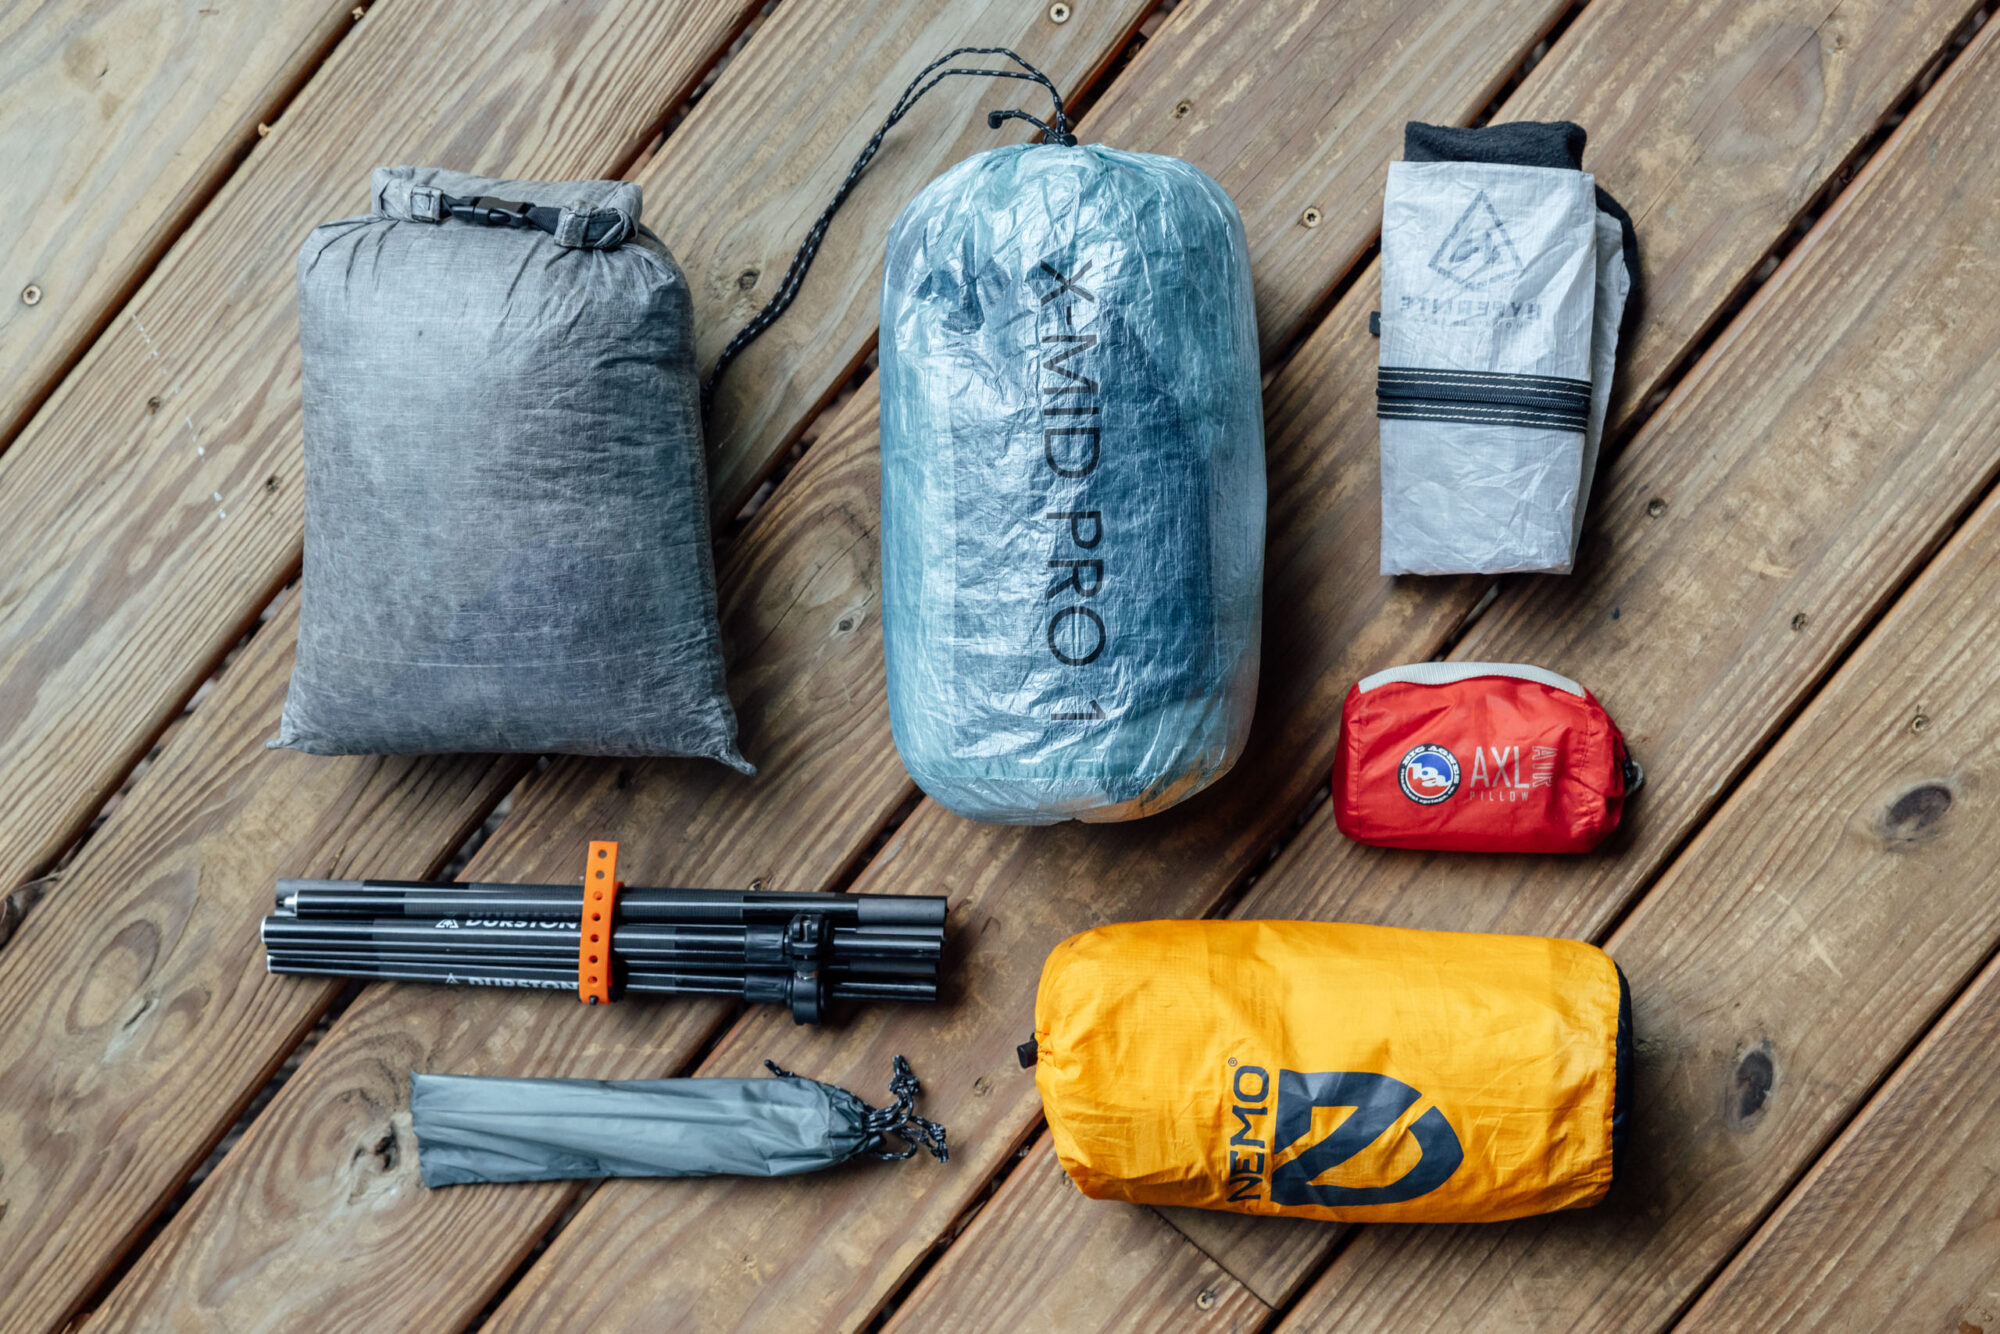 Ultralight bikepacking gear list for cold weather